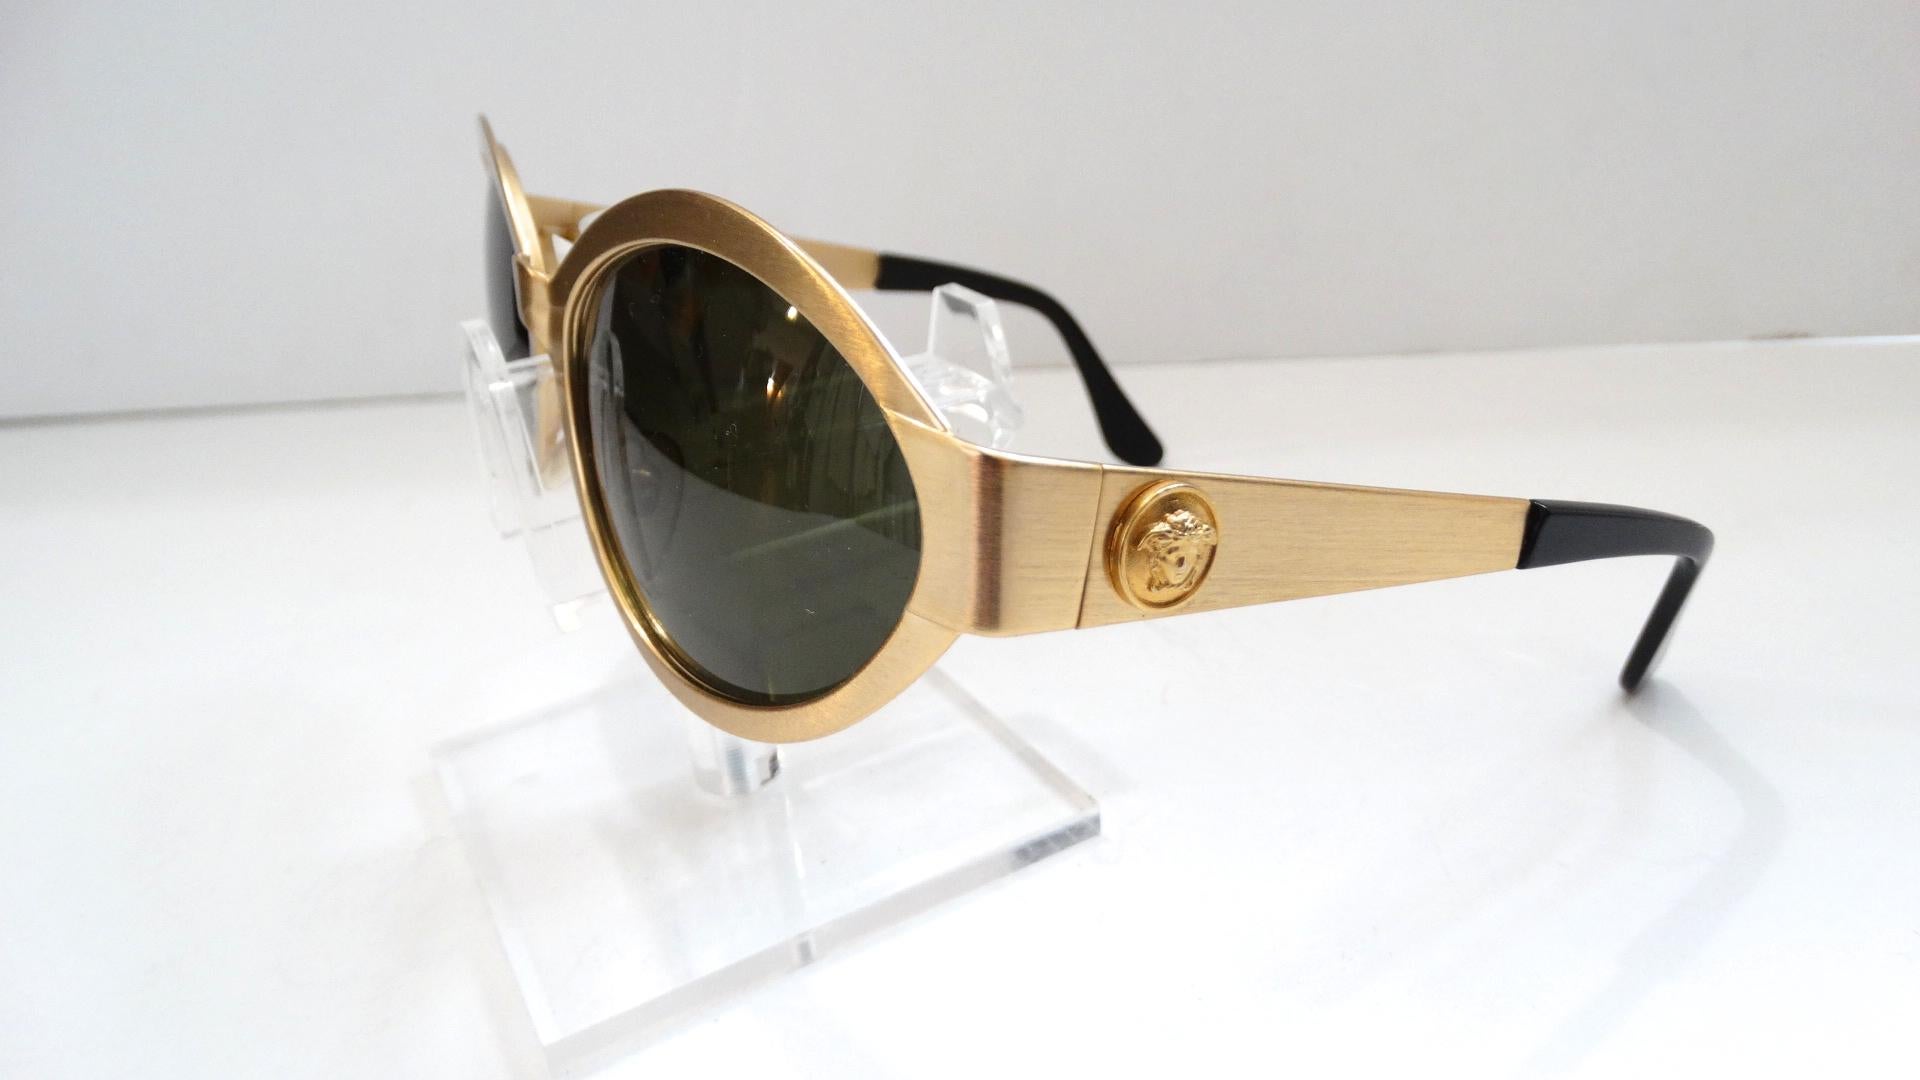 All Eyes On You While Wearing These Killer Versace Sunglasses Circa 1990s! A dead stock treasure, these sunnies are a wide oval shape and feature a matte gold metal frame. Includes dark black lenses and a gold Medusa head emblem on each arm. A true